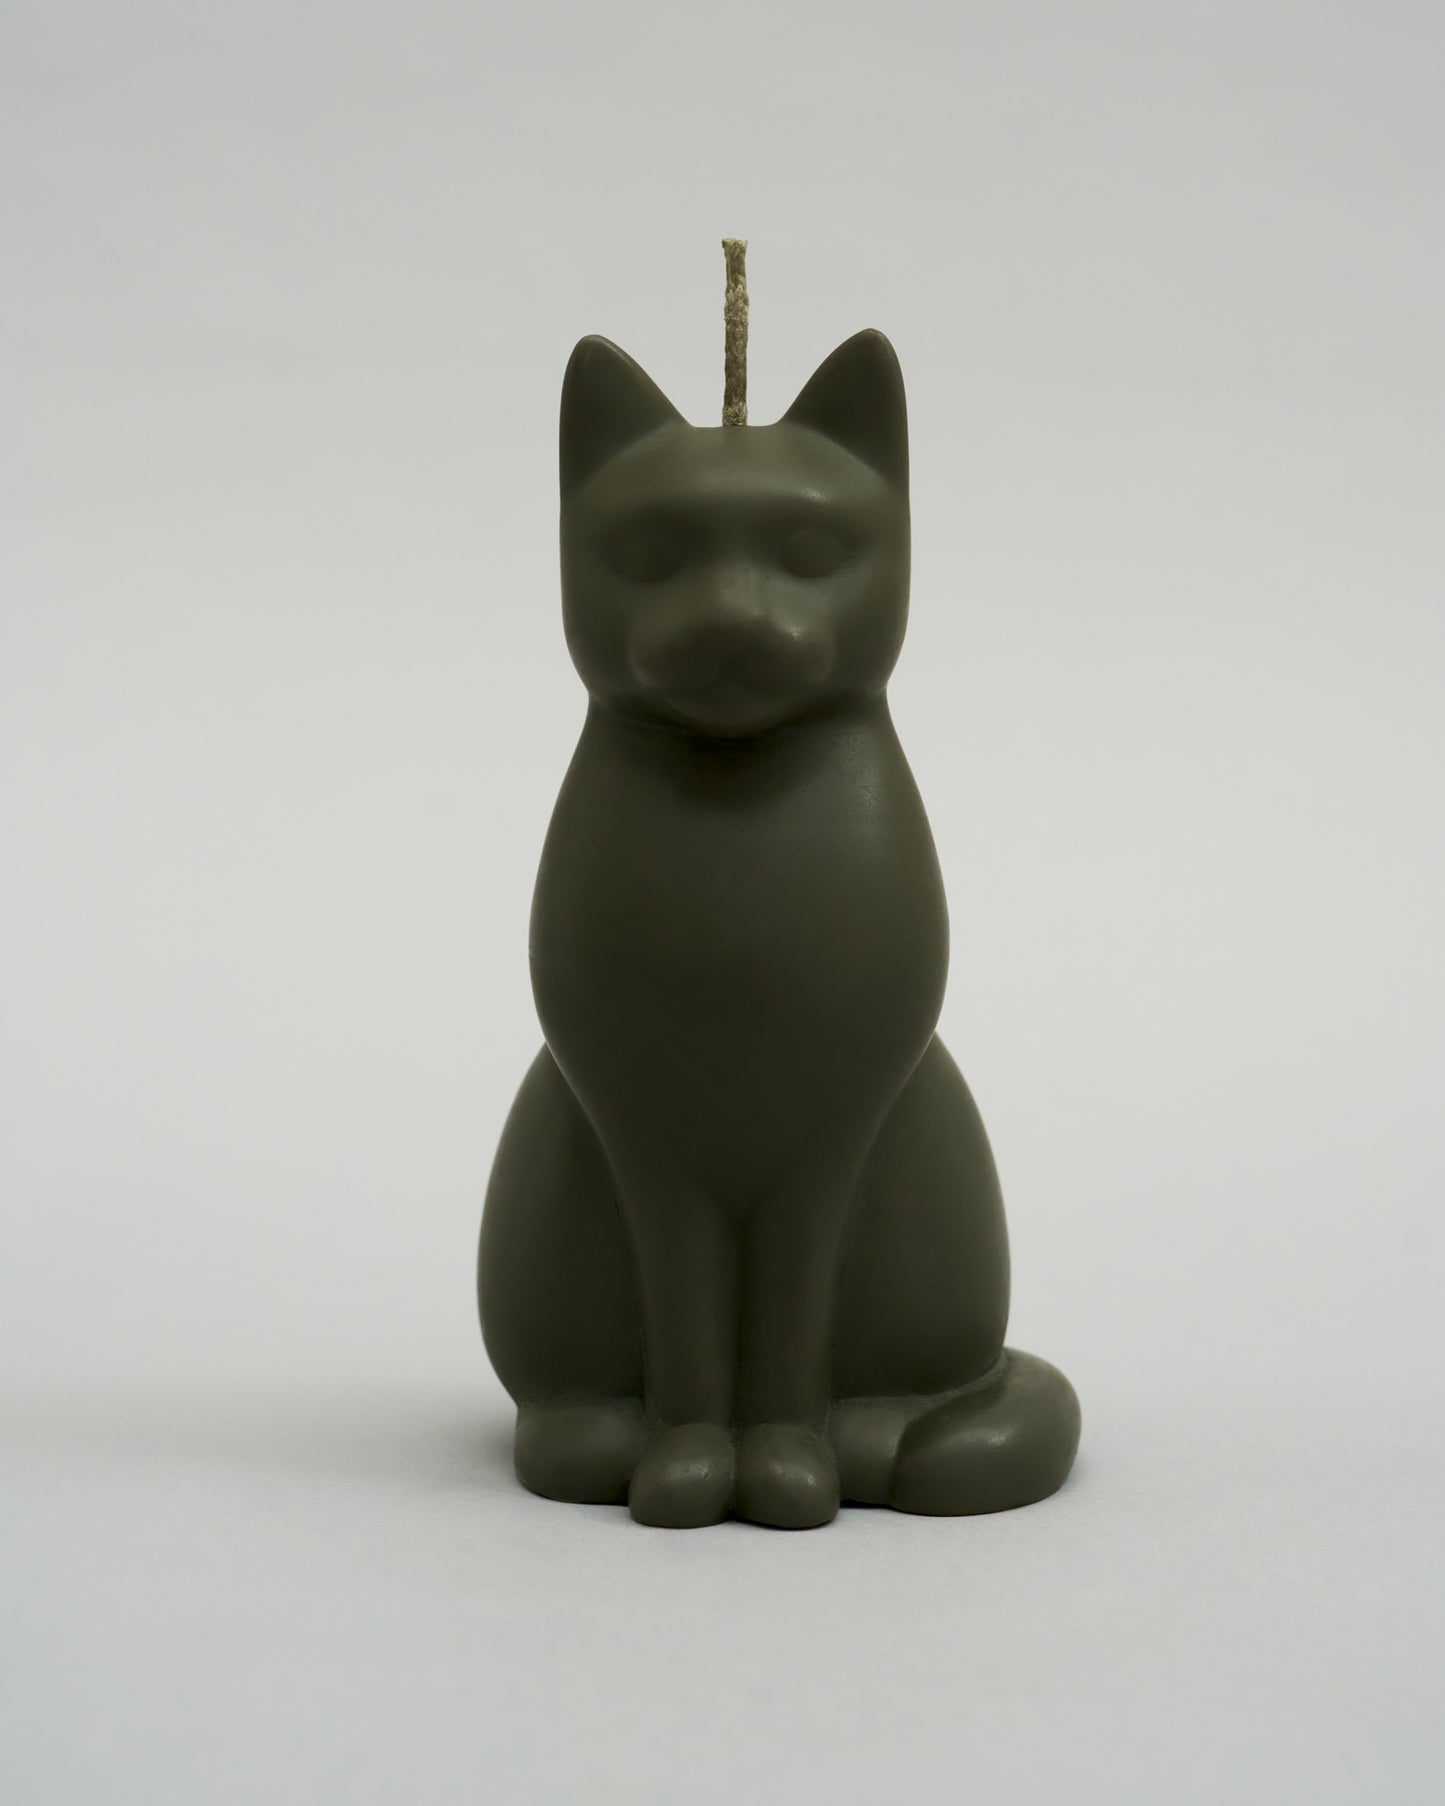 Cat Candle in "Nosyk"